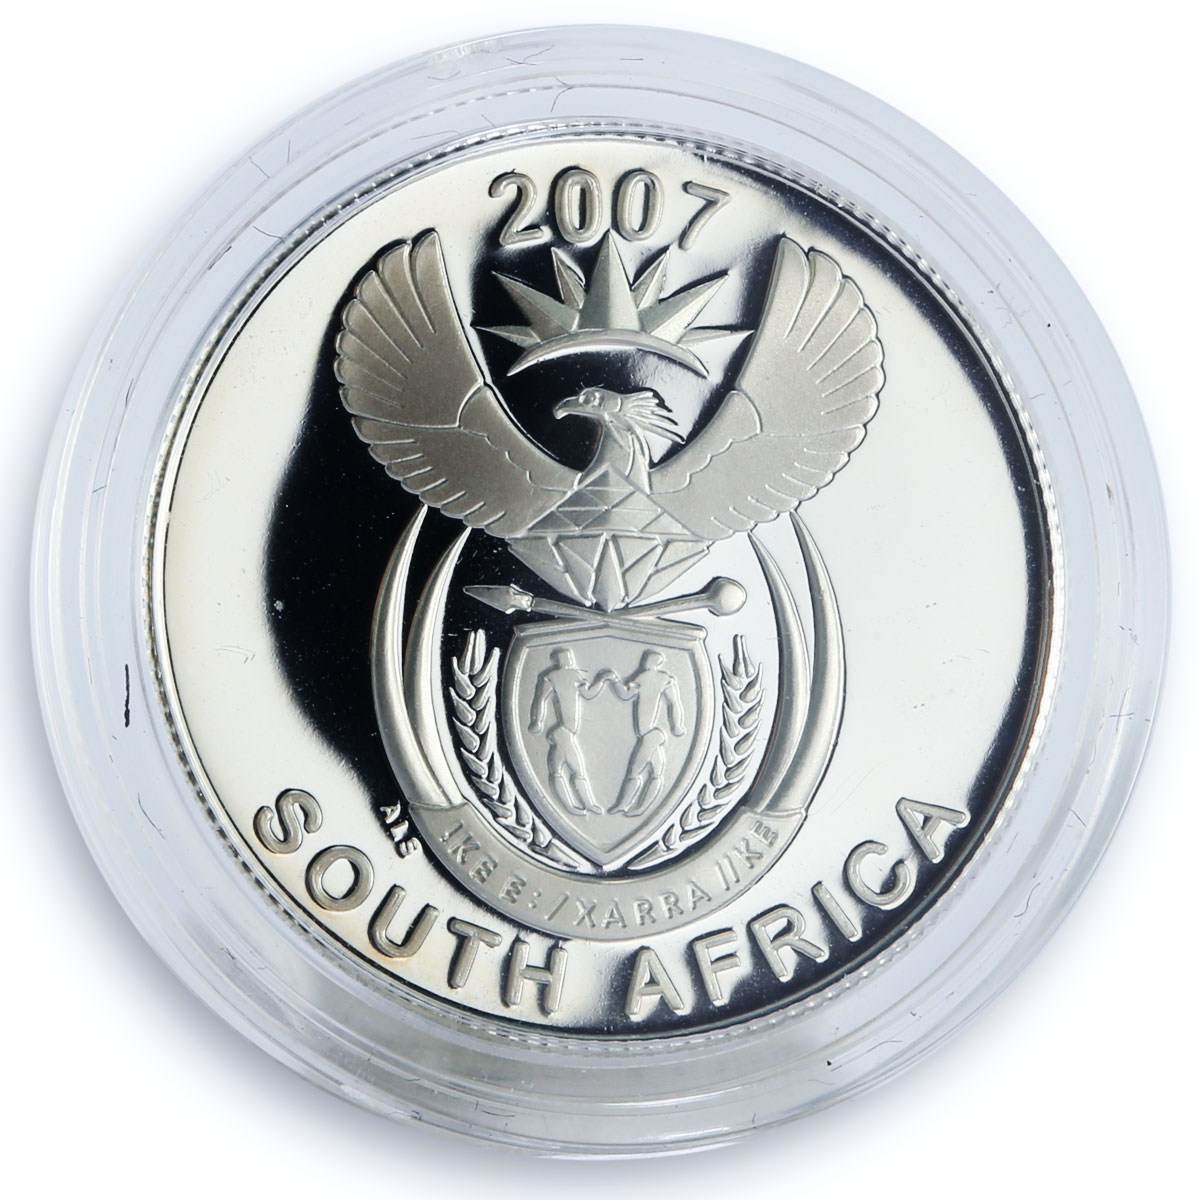 South Africa set 4 coins Peace Park Series proof silver coin 2007